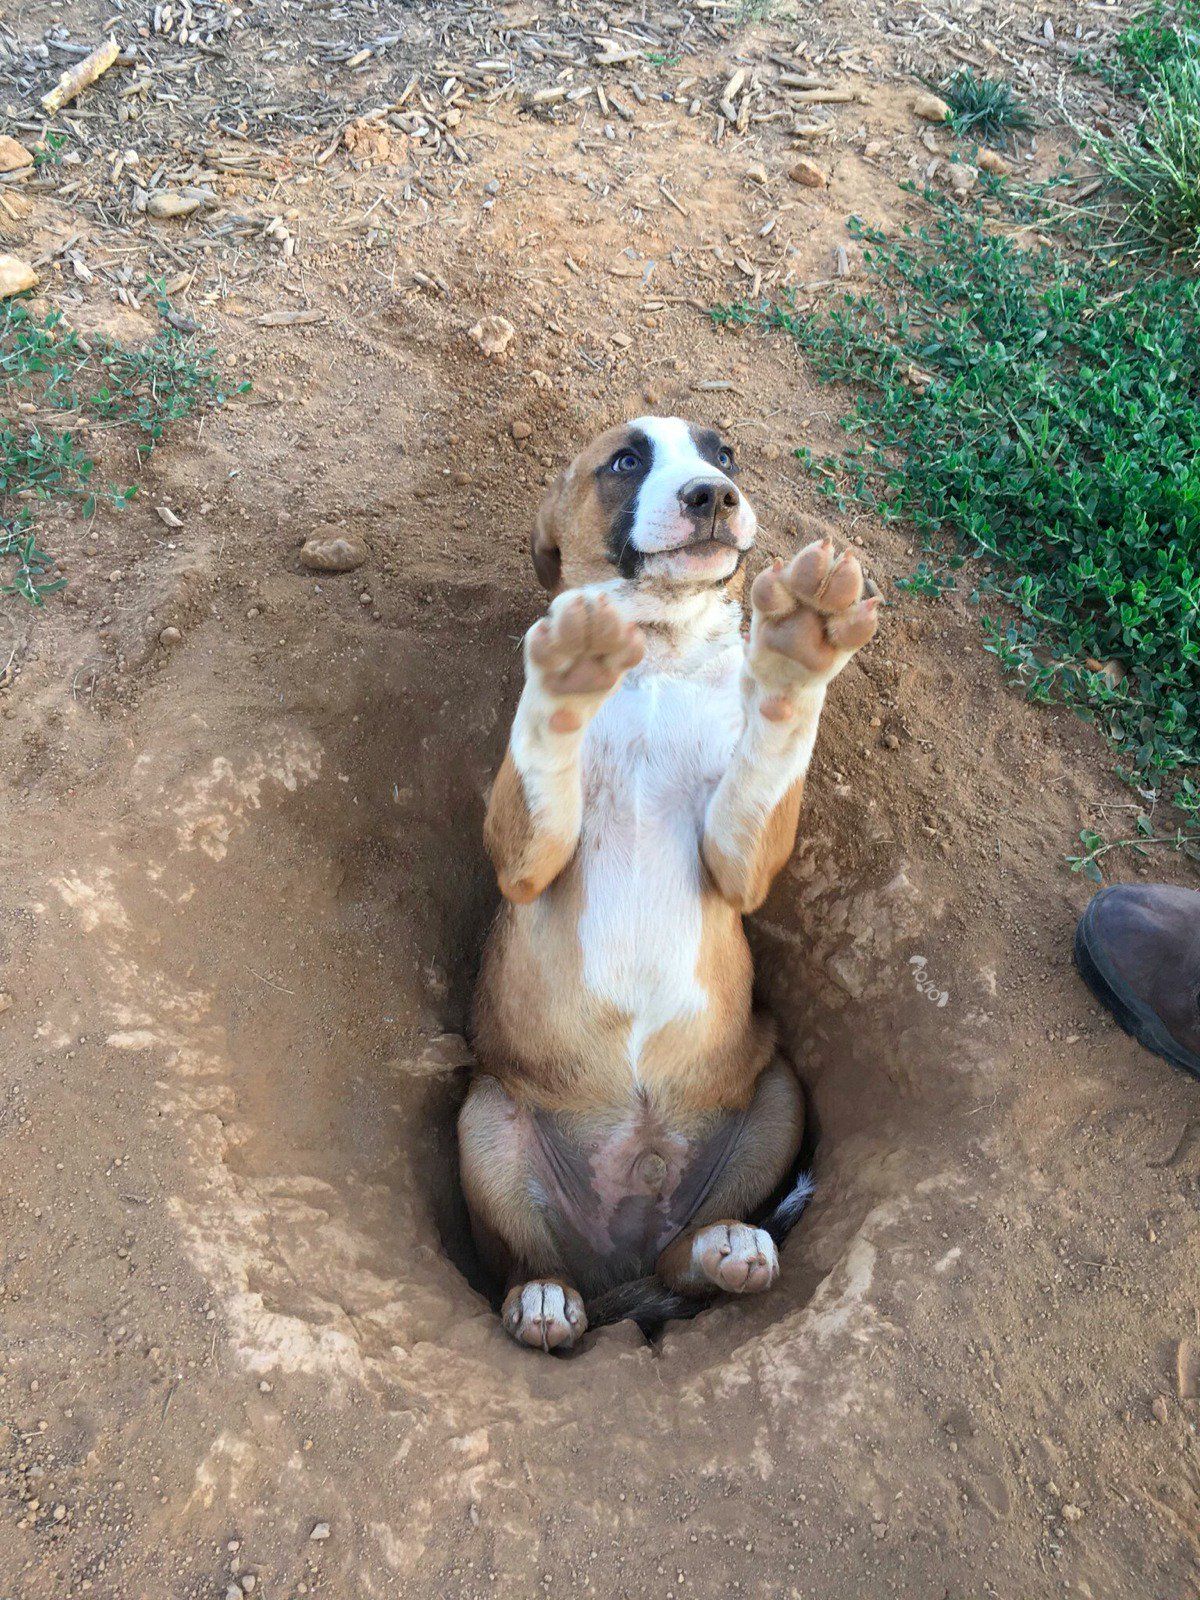 brown and white dog sitting inside a hole with the front legs extended up in a begging position